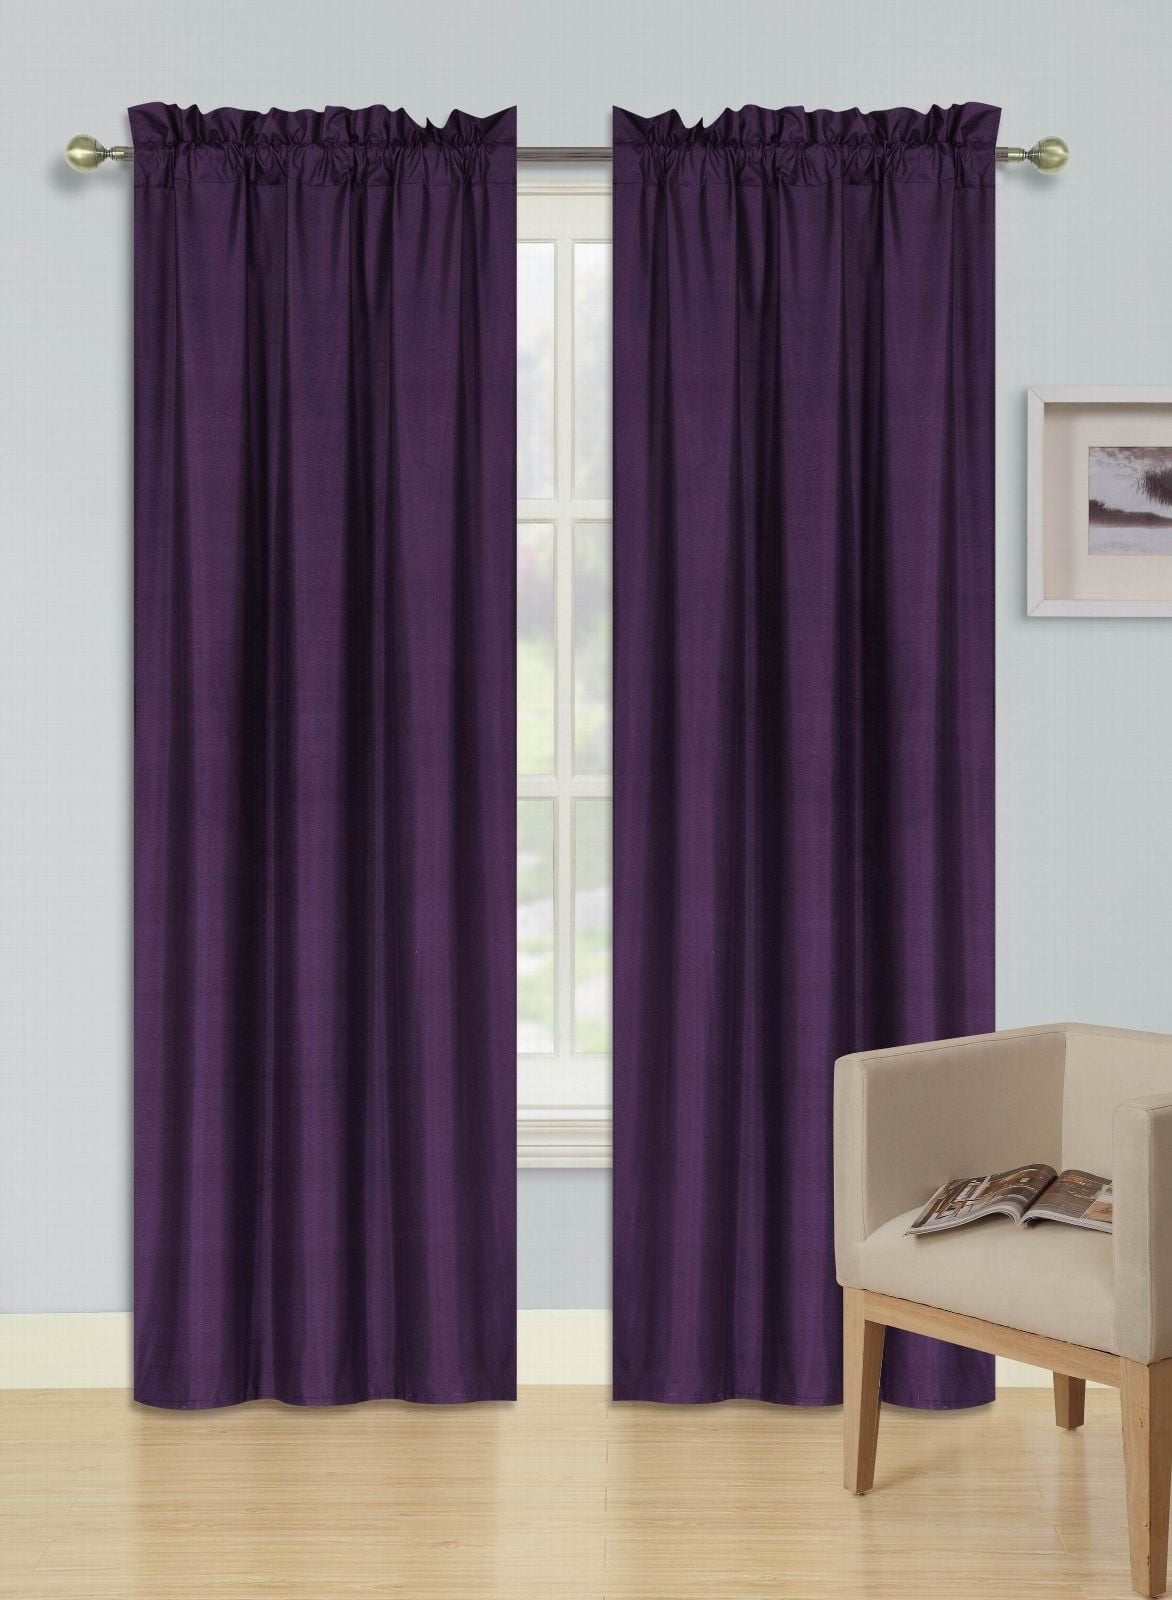 2 A72 Purple Persian Insulated Thermal Privacy Blackout Window Curtain Panels 